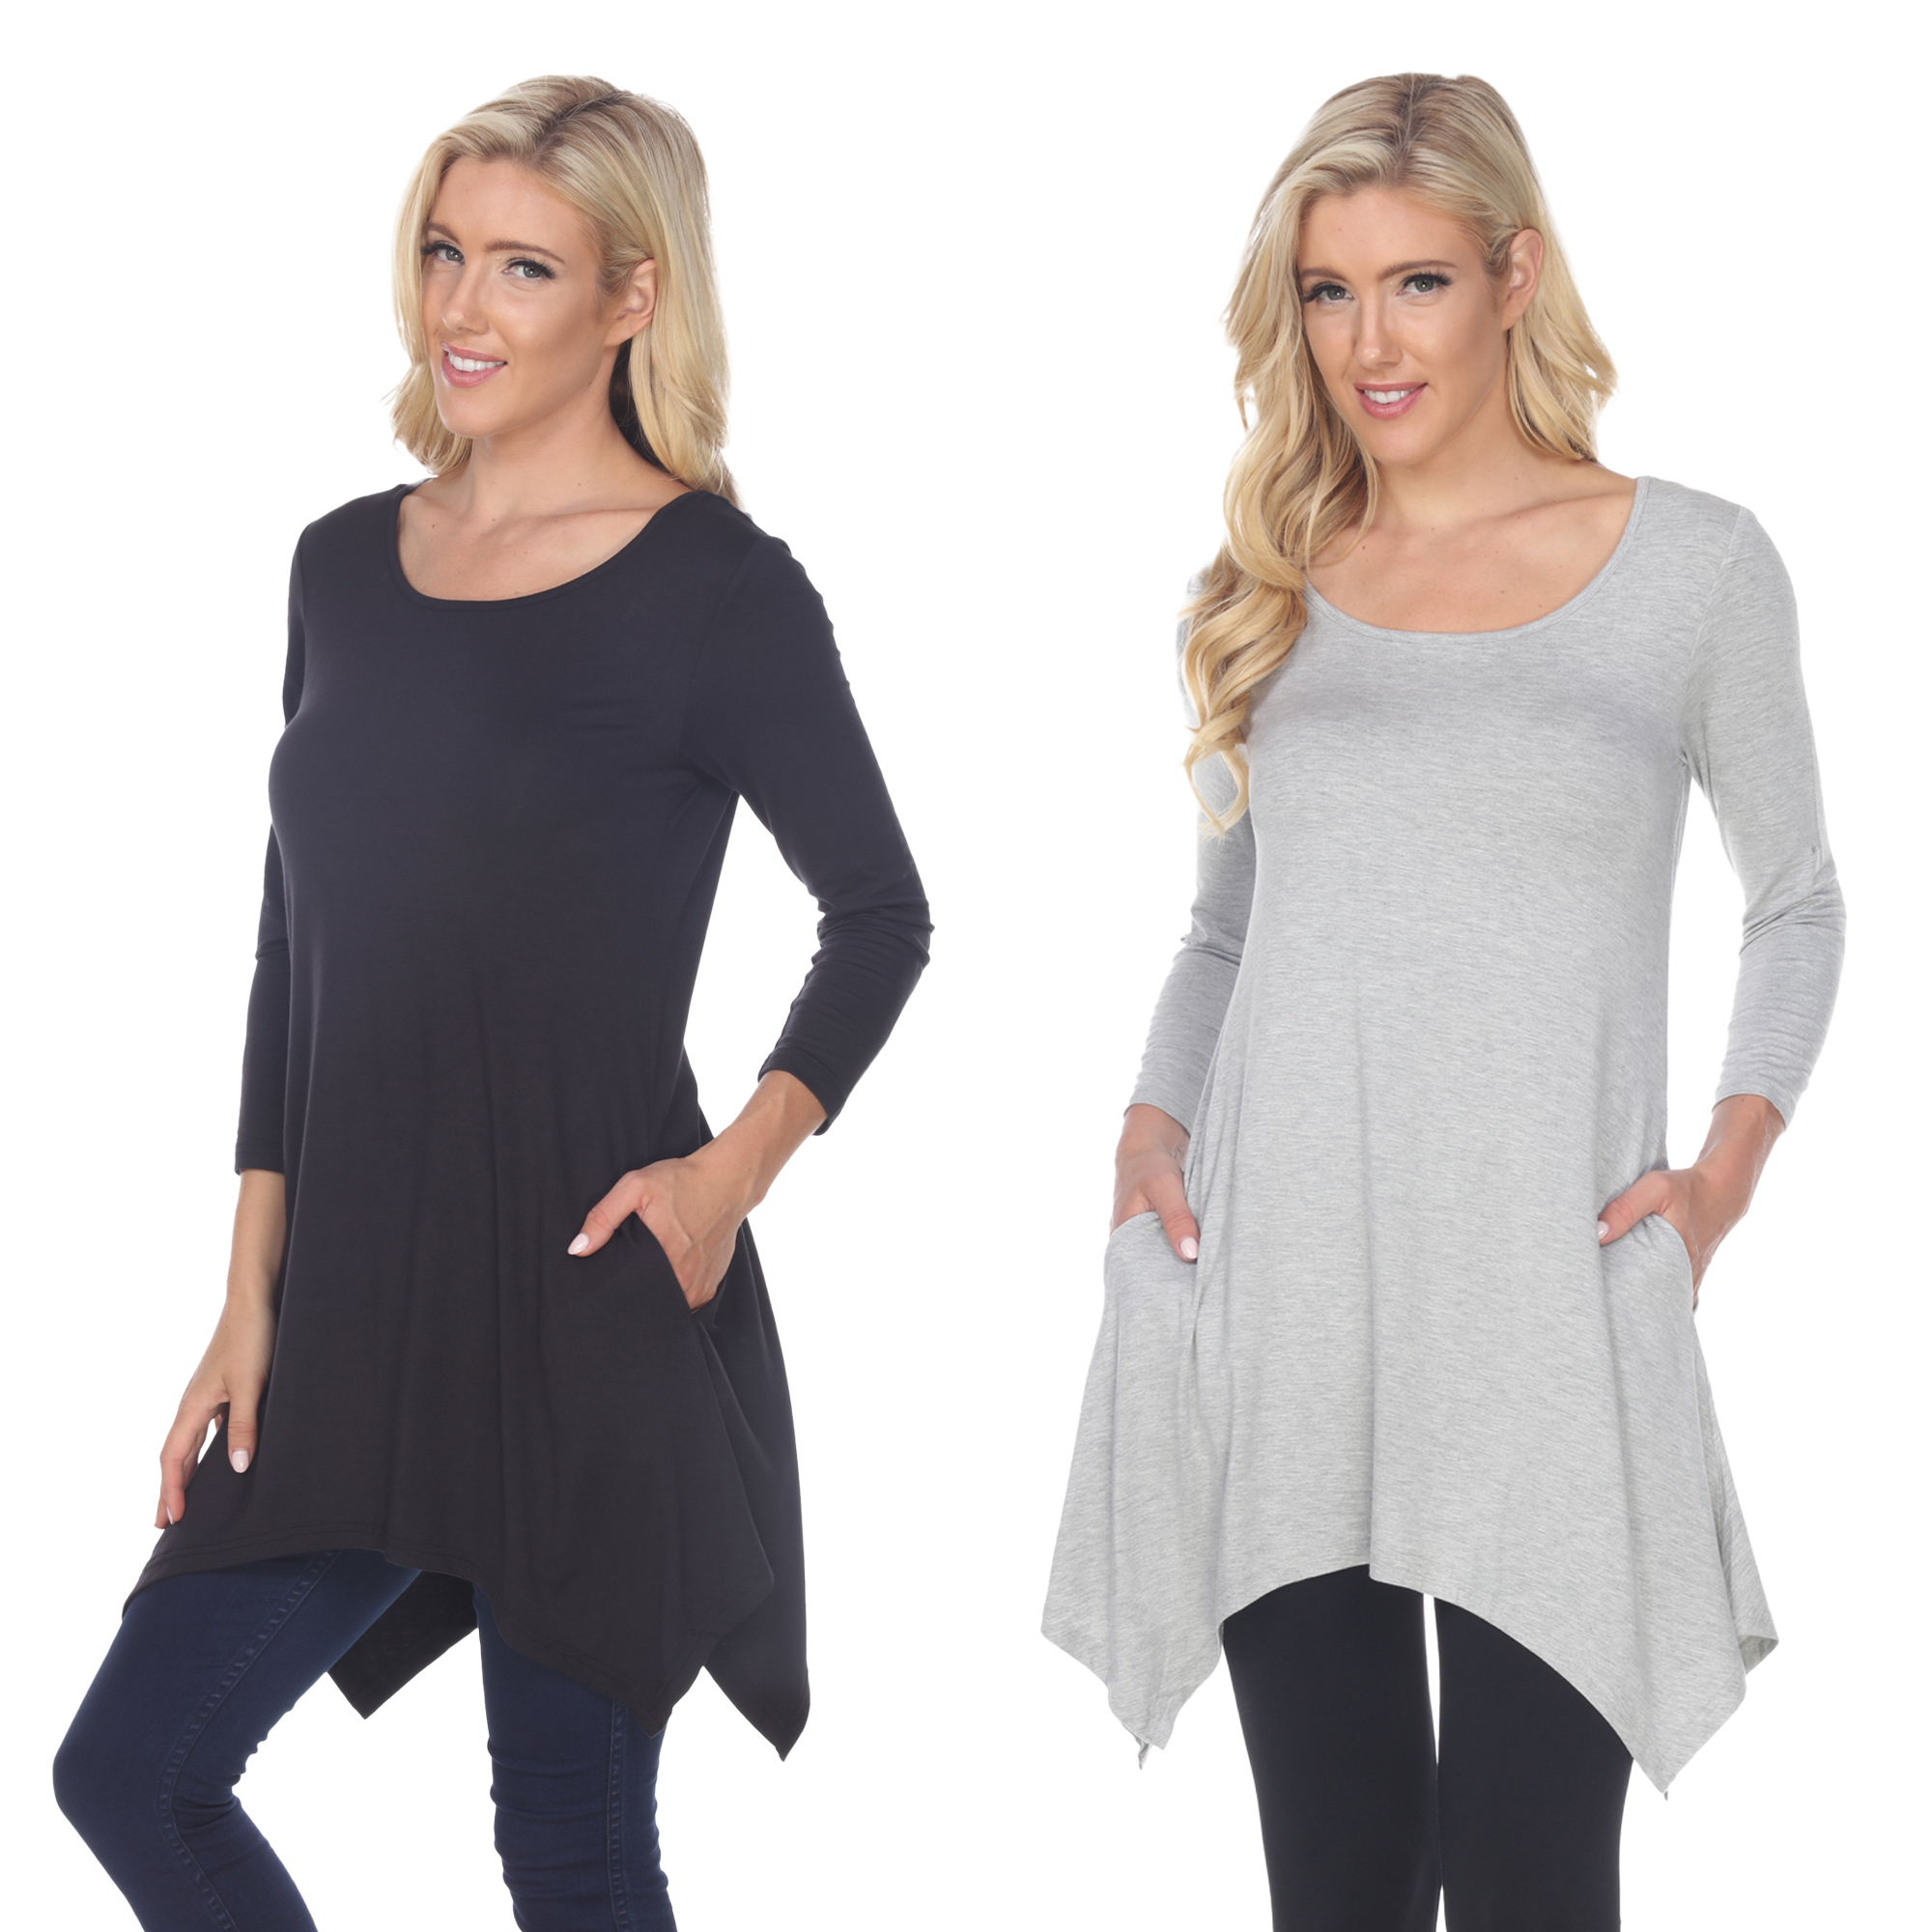 White Mark Women's Pack Of 2 Black Tunic Top - Black, Charcoal, X-Large